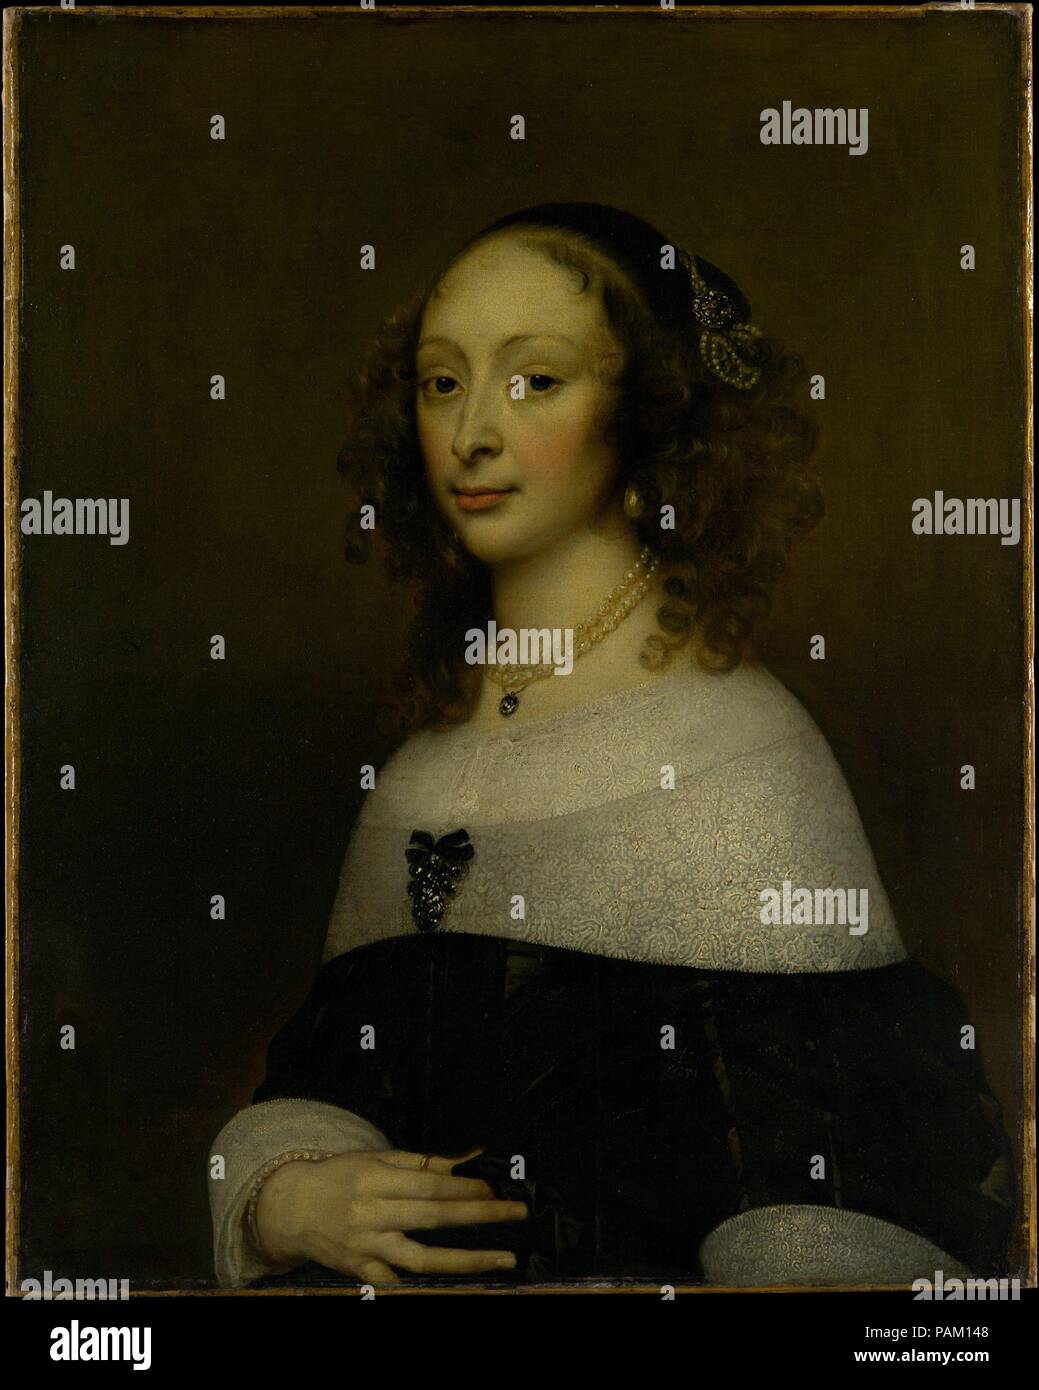 Portrait of a Woman. Artist: Adriaen Hanneman (Dutch, The Hague 1603/4-1671 The Hague). Dimensions: 31 1/2 x 25 in. (80 x 63.5 cm). Date: ca. 1653.  Hanneman was a highly successful portraitist in The Hague, where his Dutch version of Van Dyck's style ideally suited the court city's cosmopolitan patrons. This portrait of an elegant young woman dates from about 1653. The detailed passages of lace were probably painted by an assistant. Museum: Metropolitan Museum of Art, New York, USA. Stock Photo